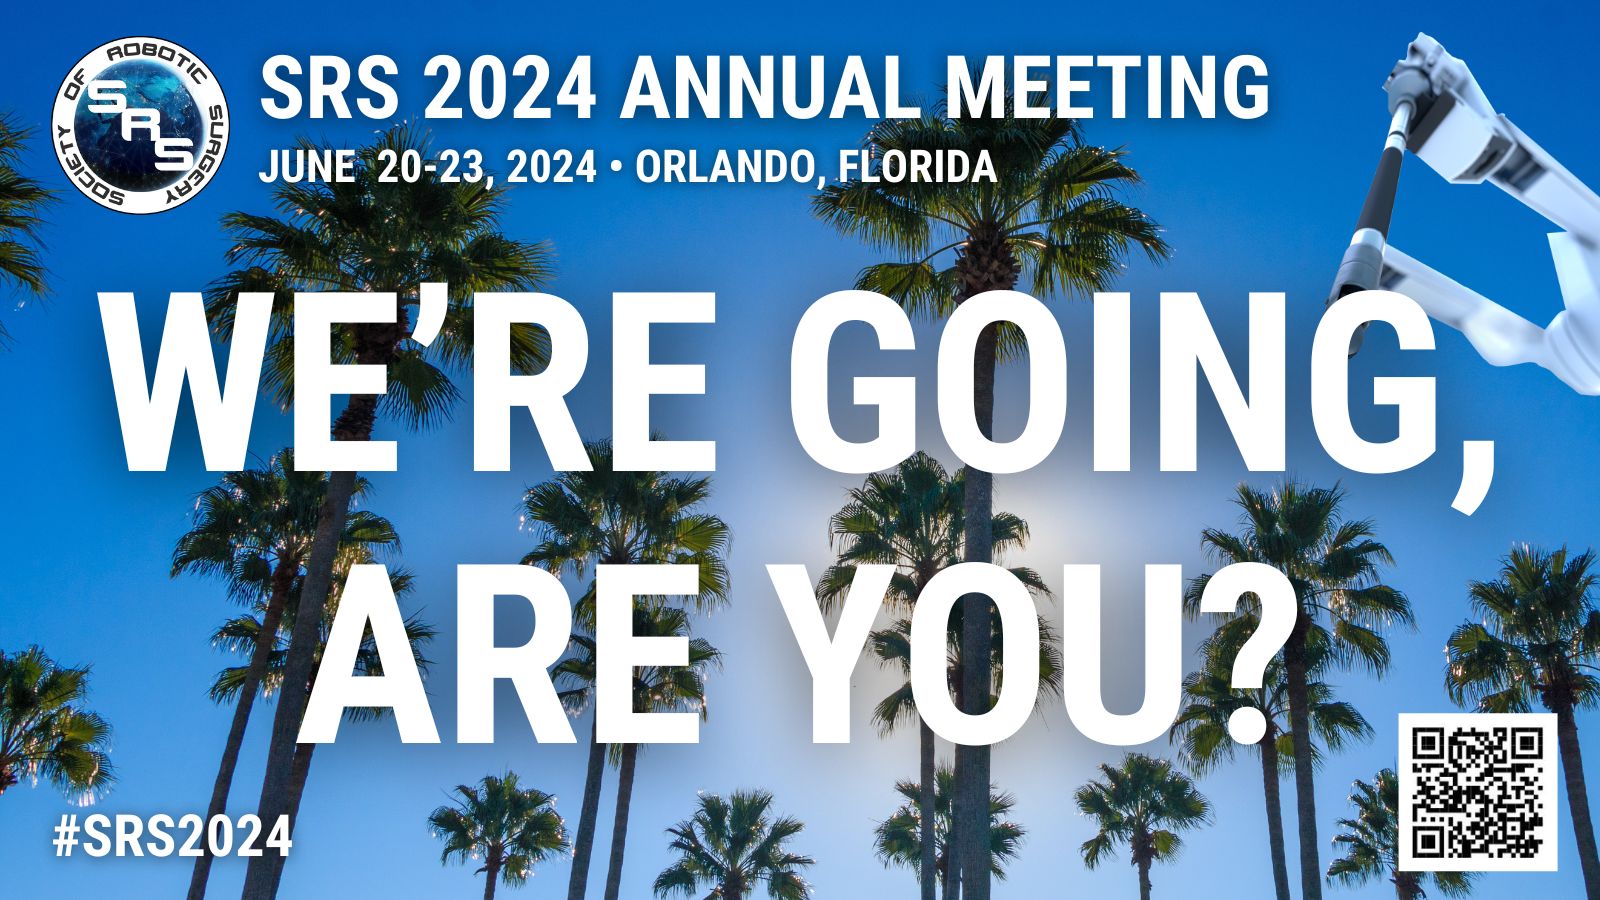 Meet R2 Surgical at the Society of Robotic Surgery Annual Meeting